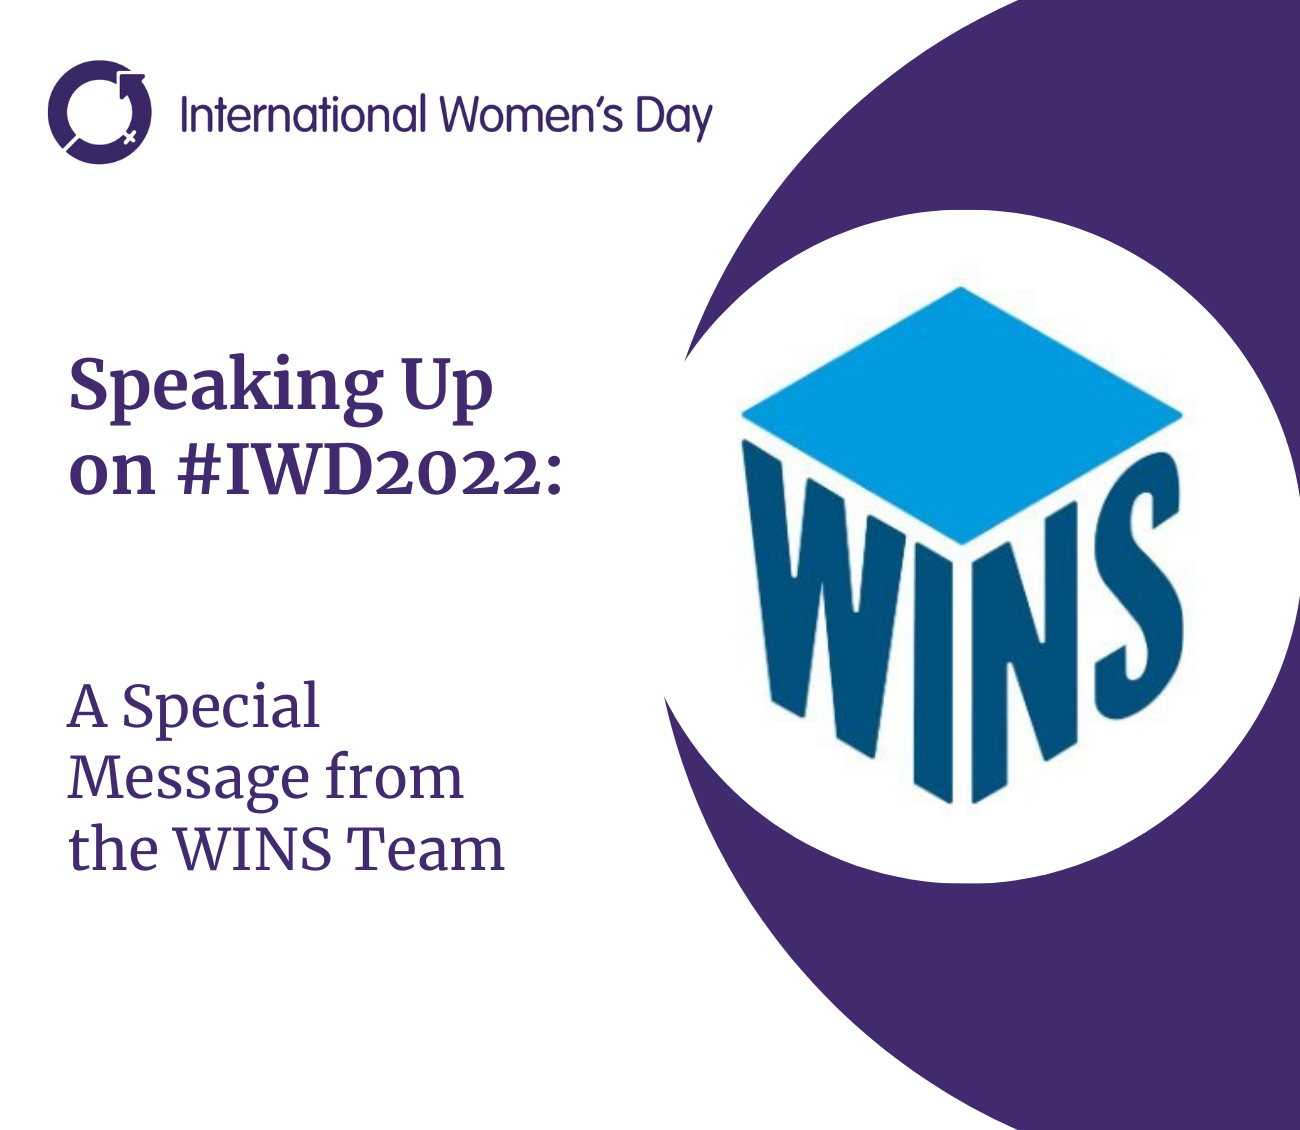 WINS Shows its Commitment to Breaking the Gender Bias by Participating in IWD Campaign